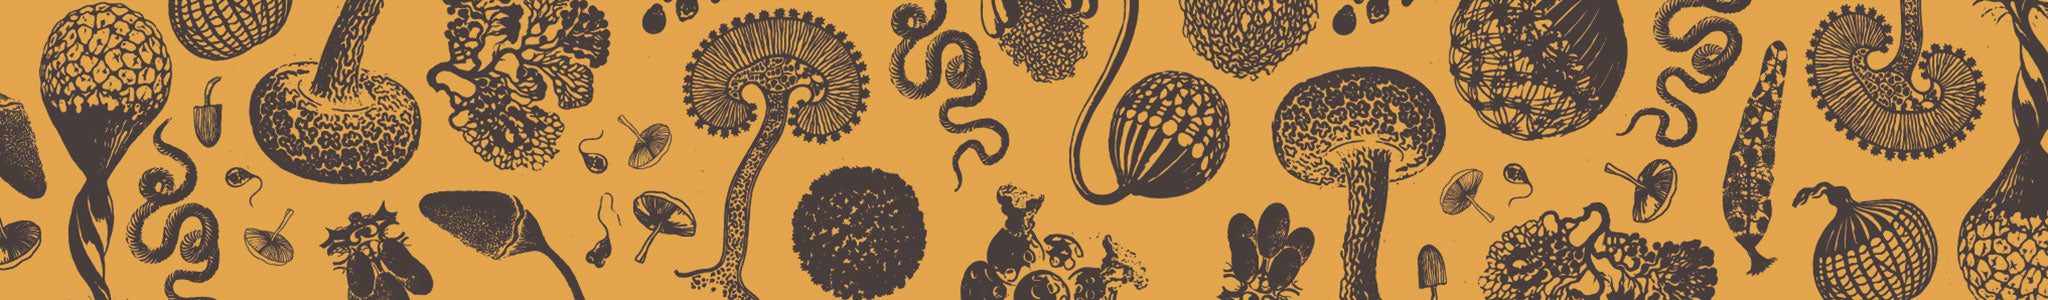 Pattern from the Hamilton's mushroom packaging showing abstract mushroom and plant shapes.